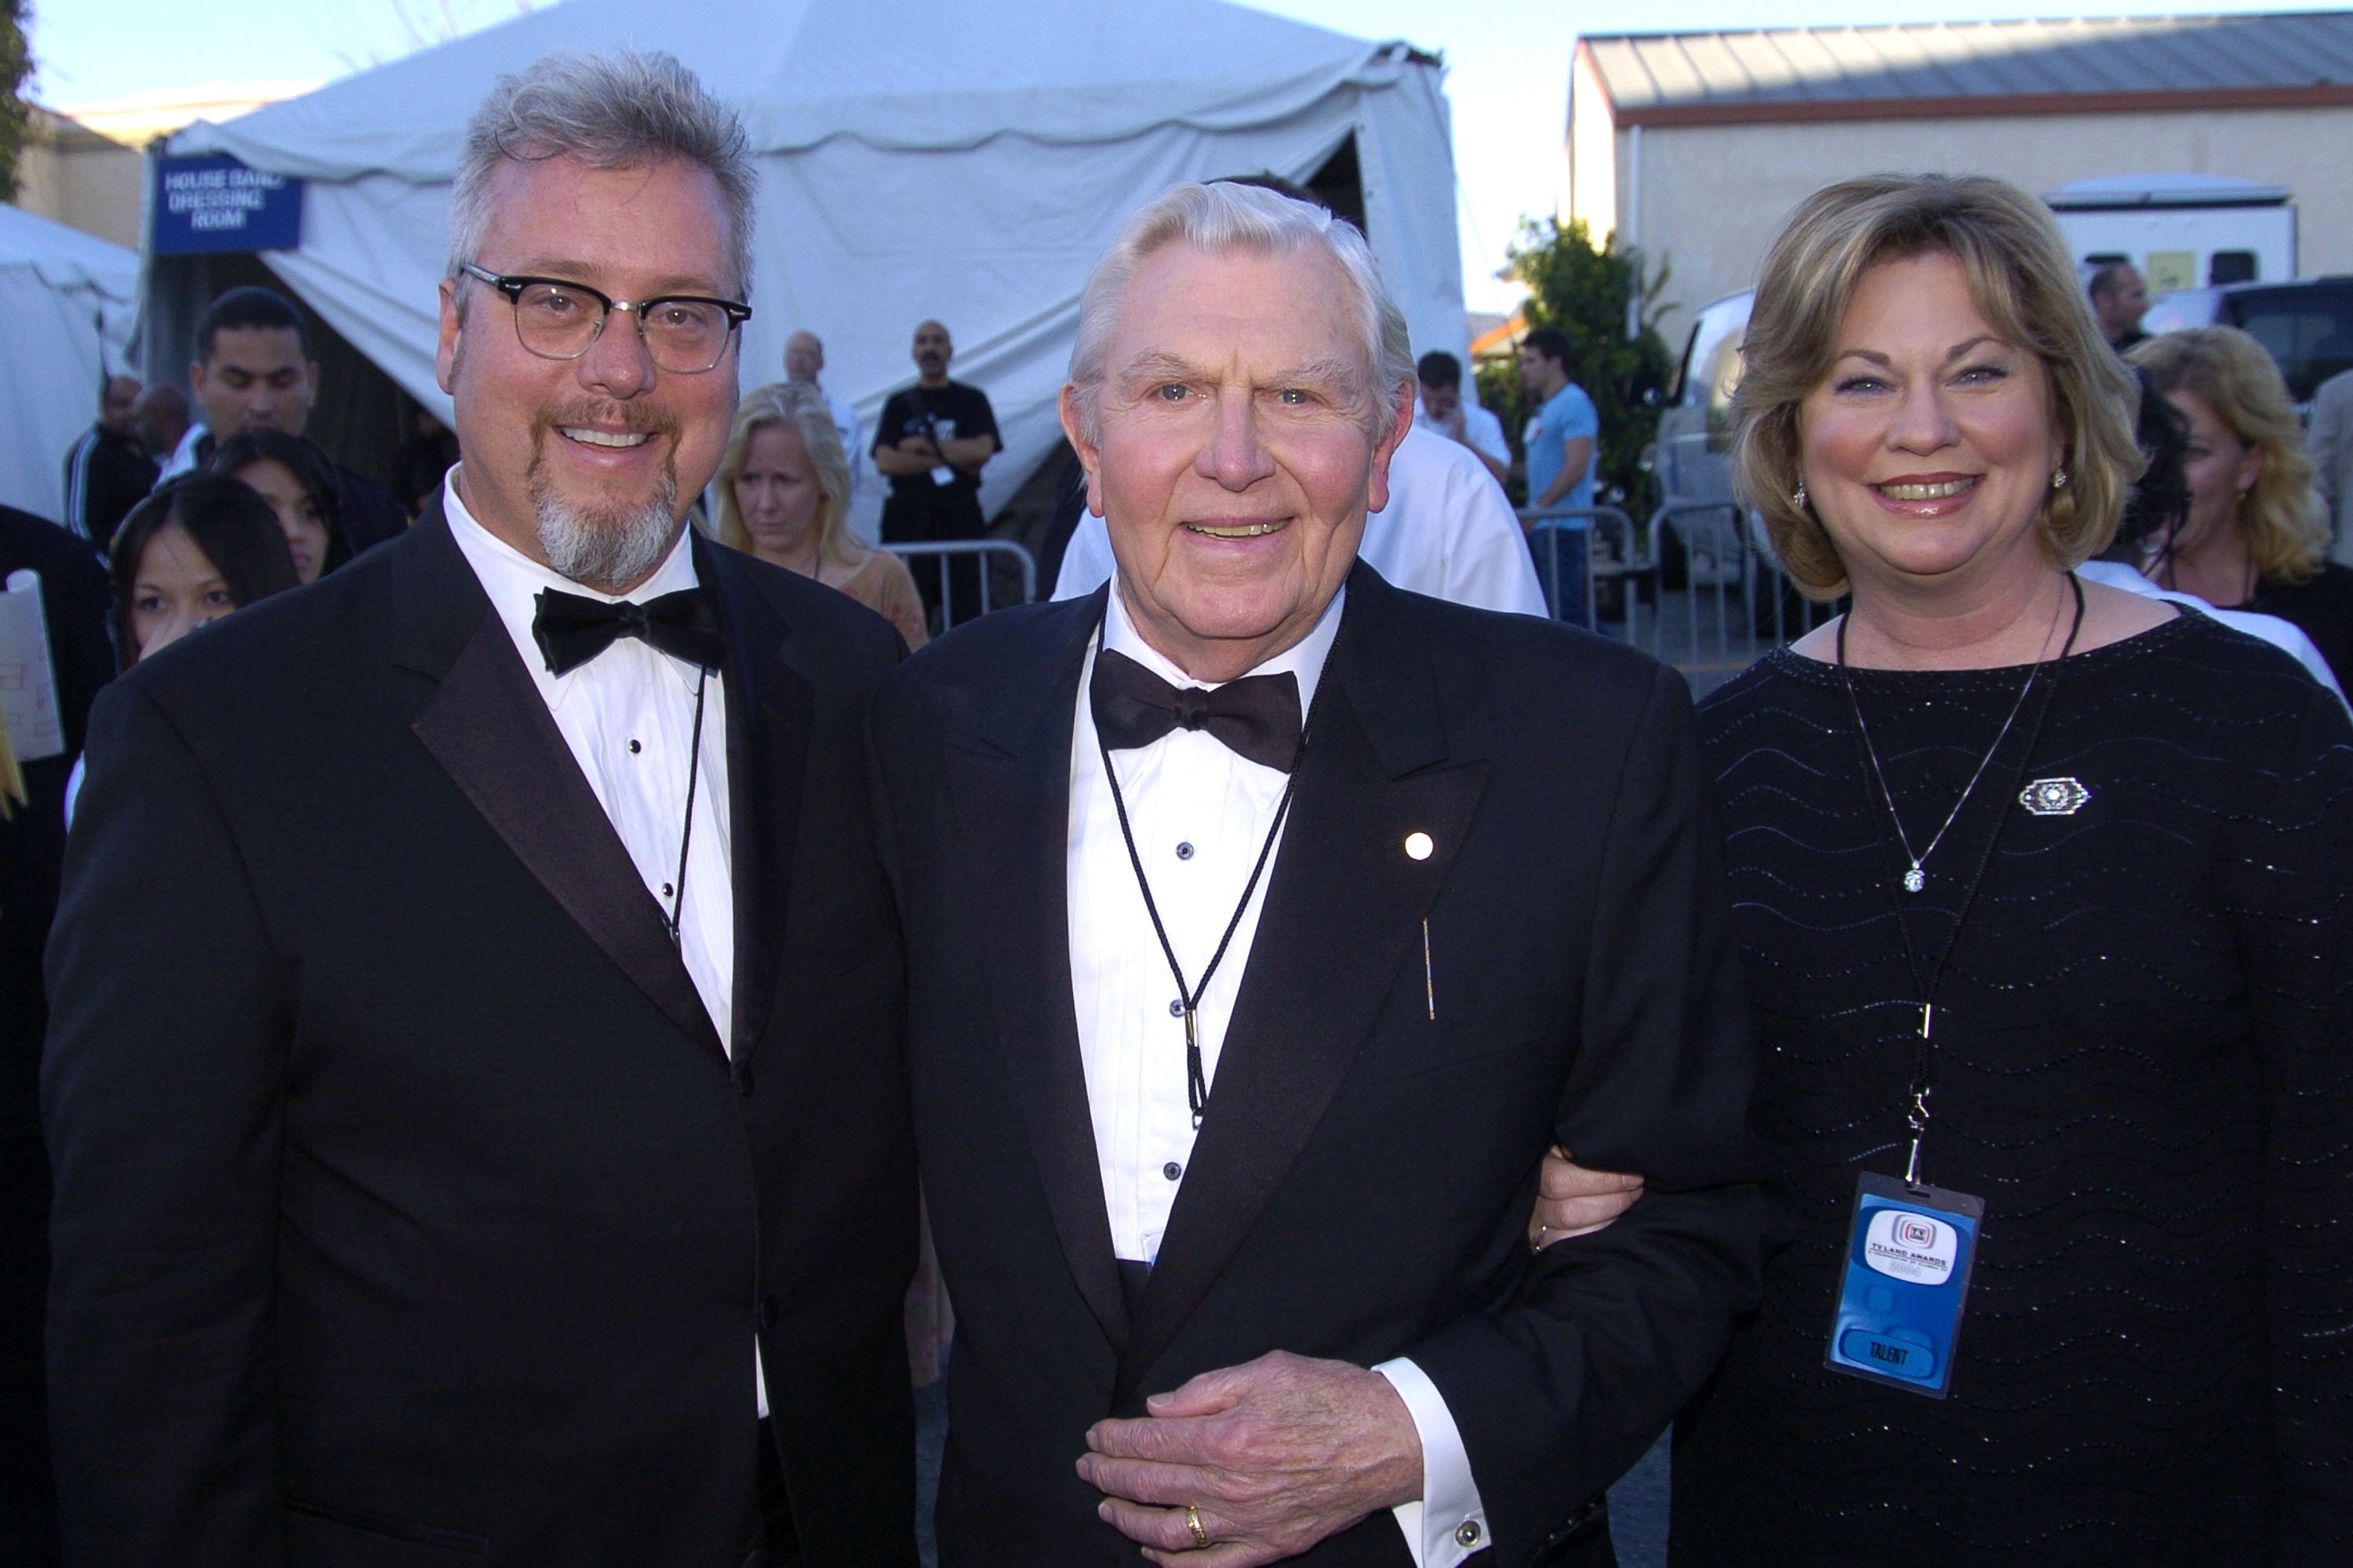 Larry Jones, Andy Griffith and Cindi Knight at the 2004 TV Land Awards airing March 17, 2004 | Source: Getty Images